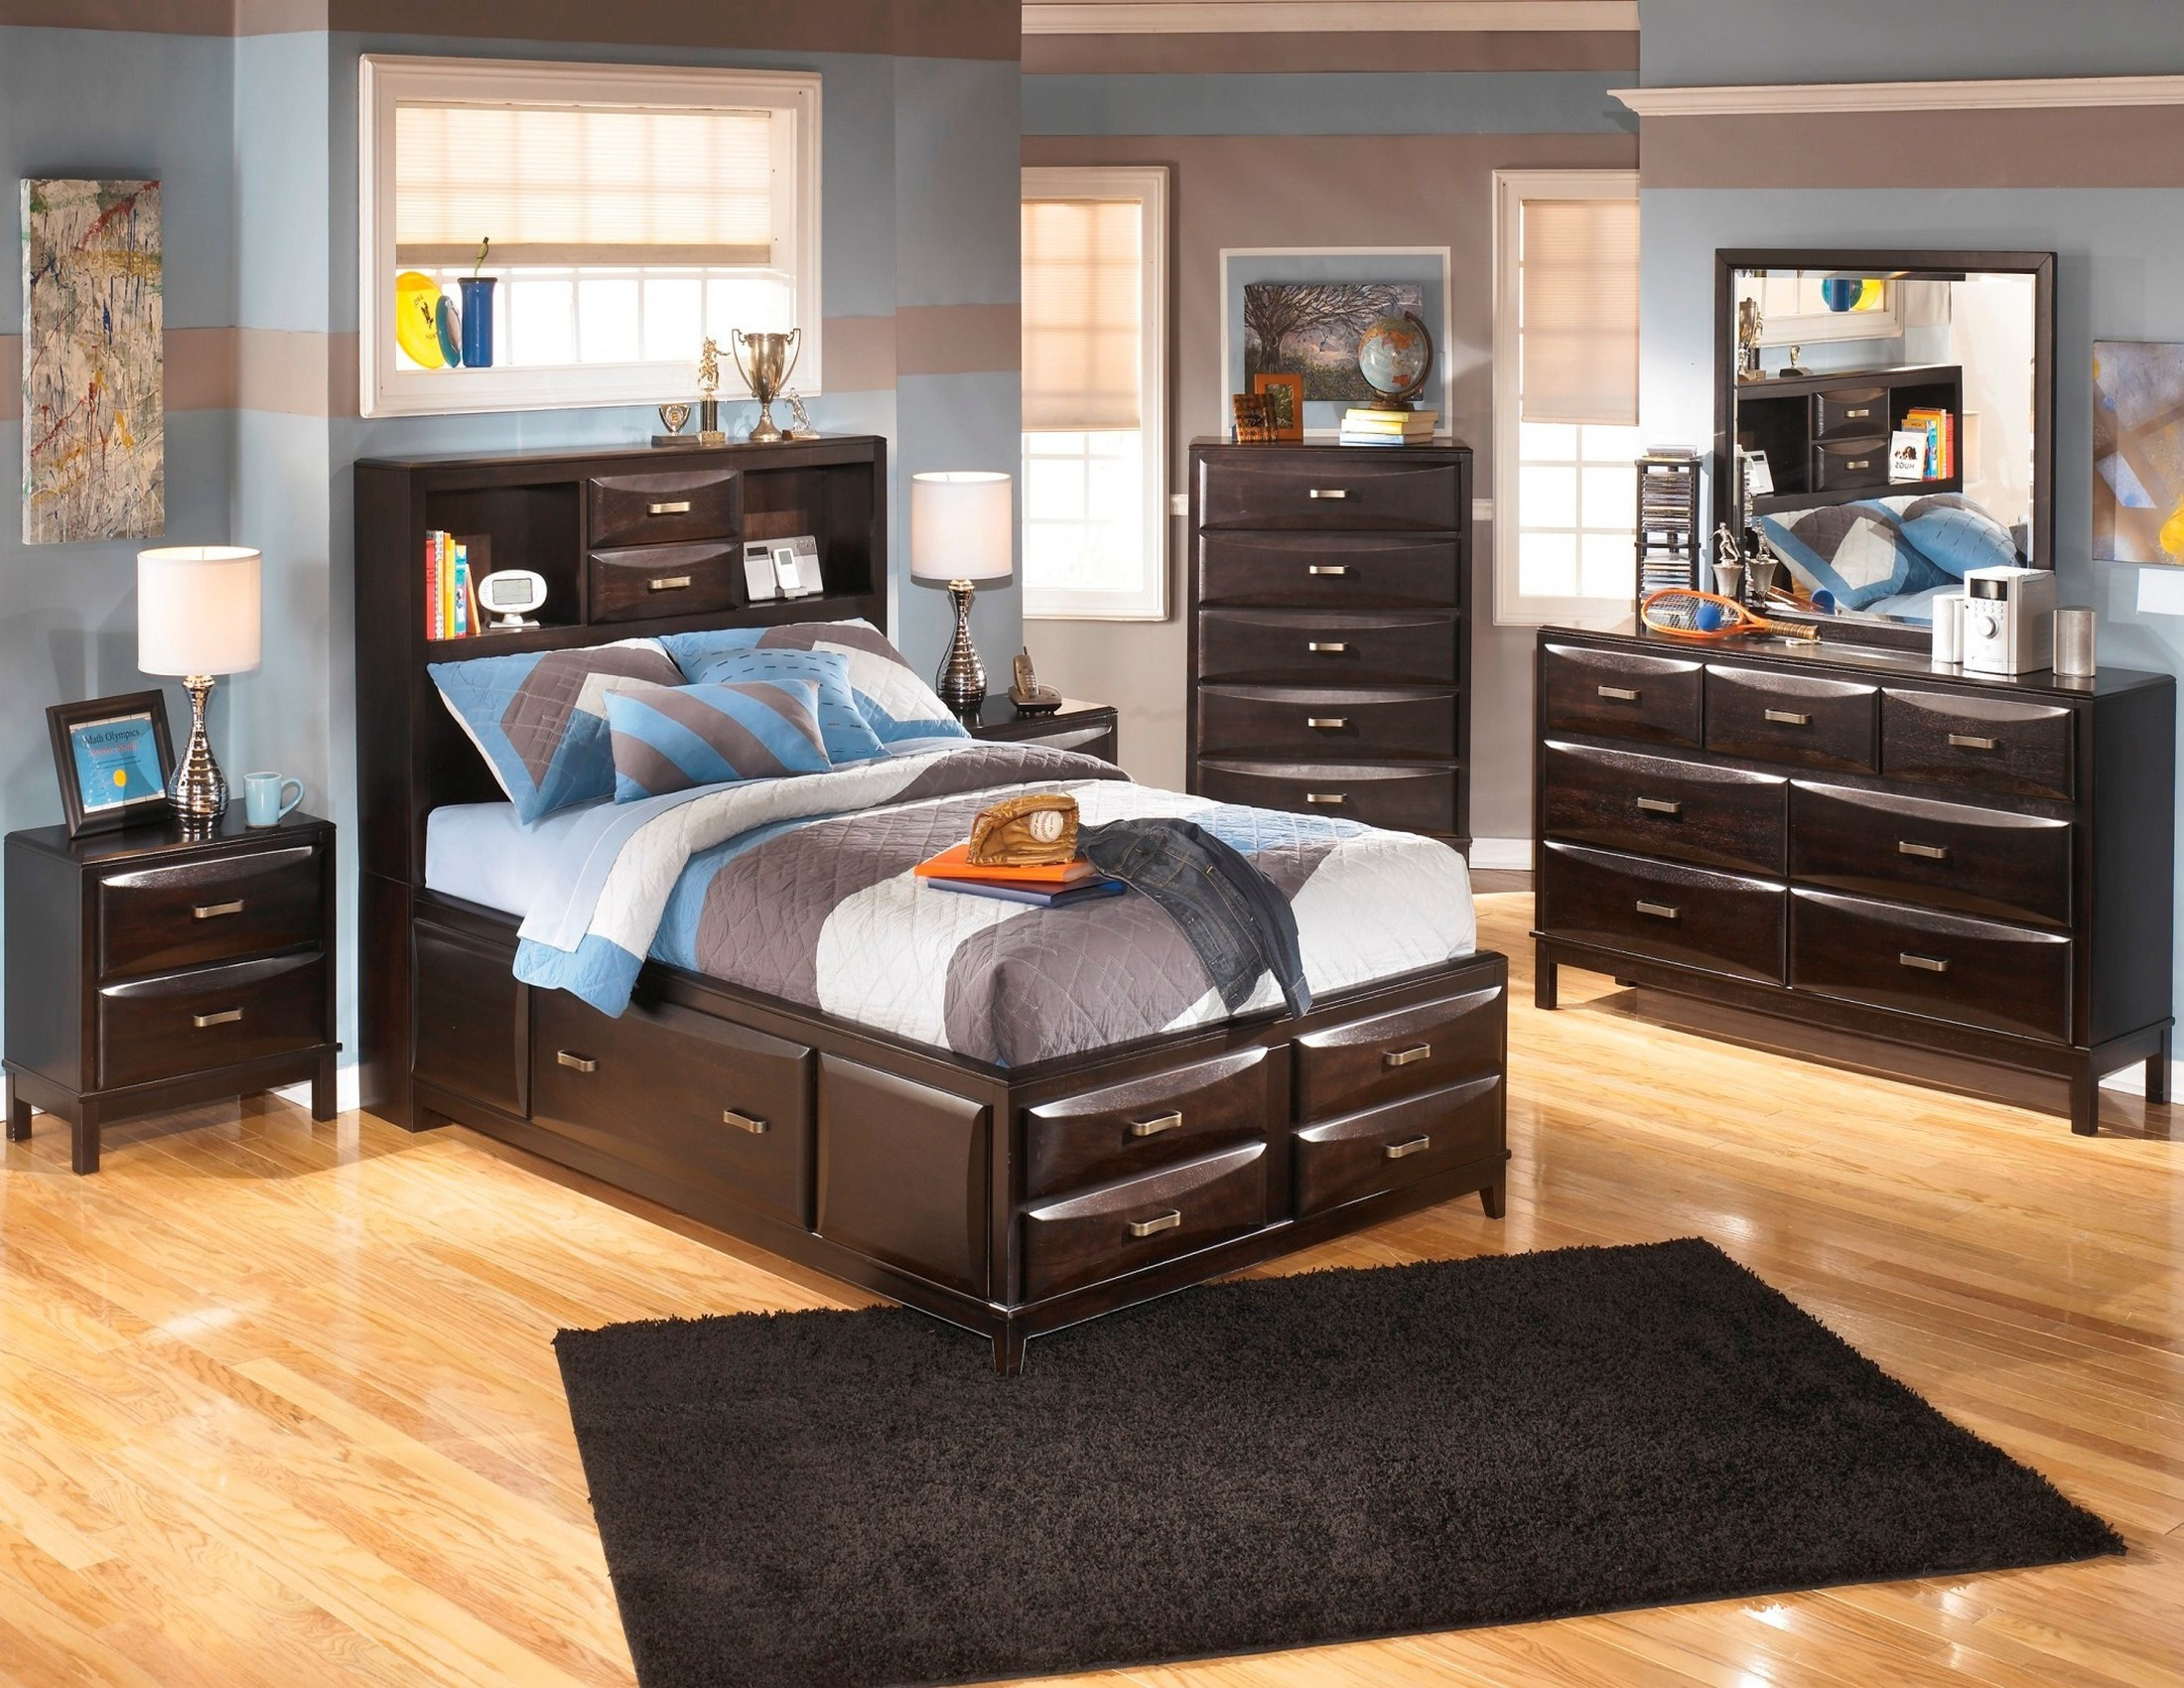 Bedroom Set With Storage
 Kira Youth Storage Bedroom Set from Ashley B473